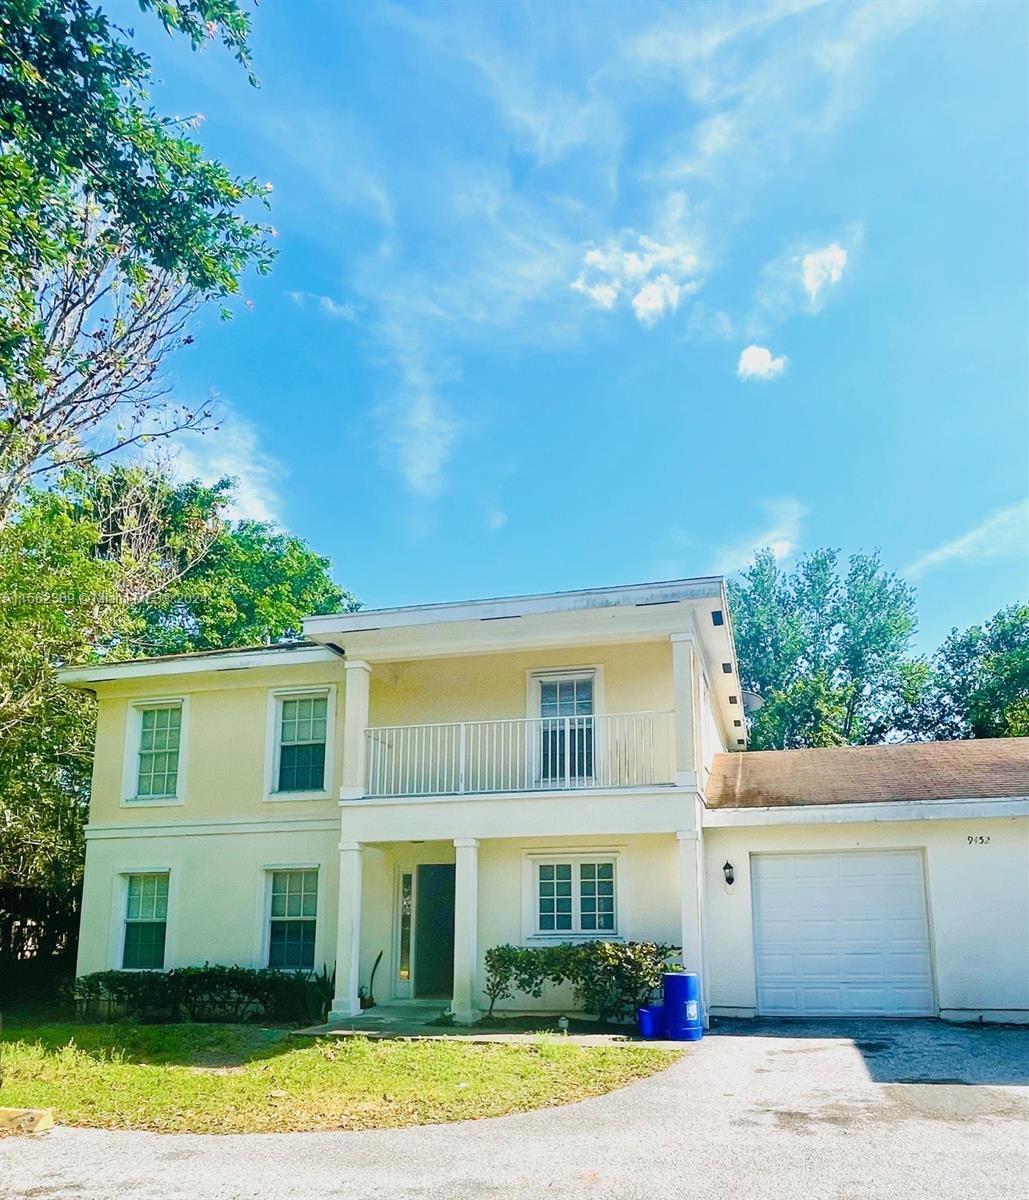 Rental Property at 9452 Roan Ln Ln B, West Palm Beach, Palm Beach County, Florida - Bedrooms: 4 
Bathrooms: 2  - $2,995 MO.